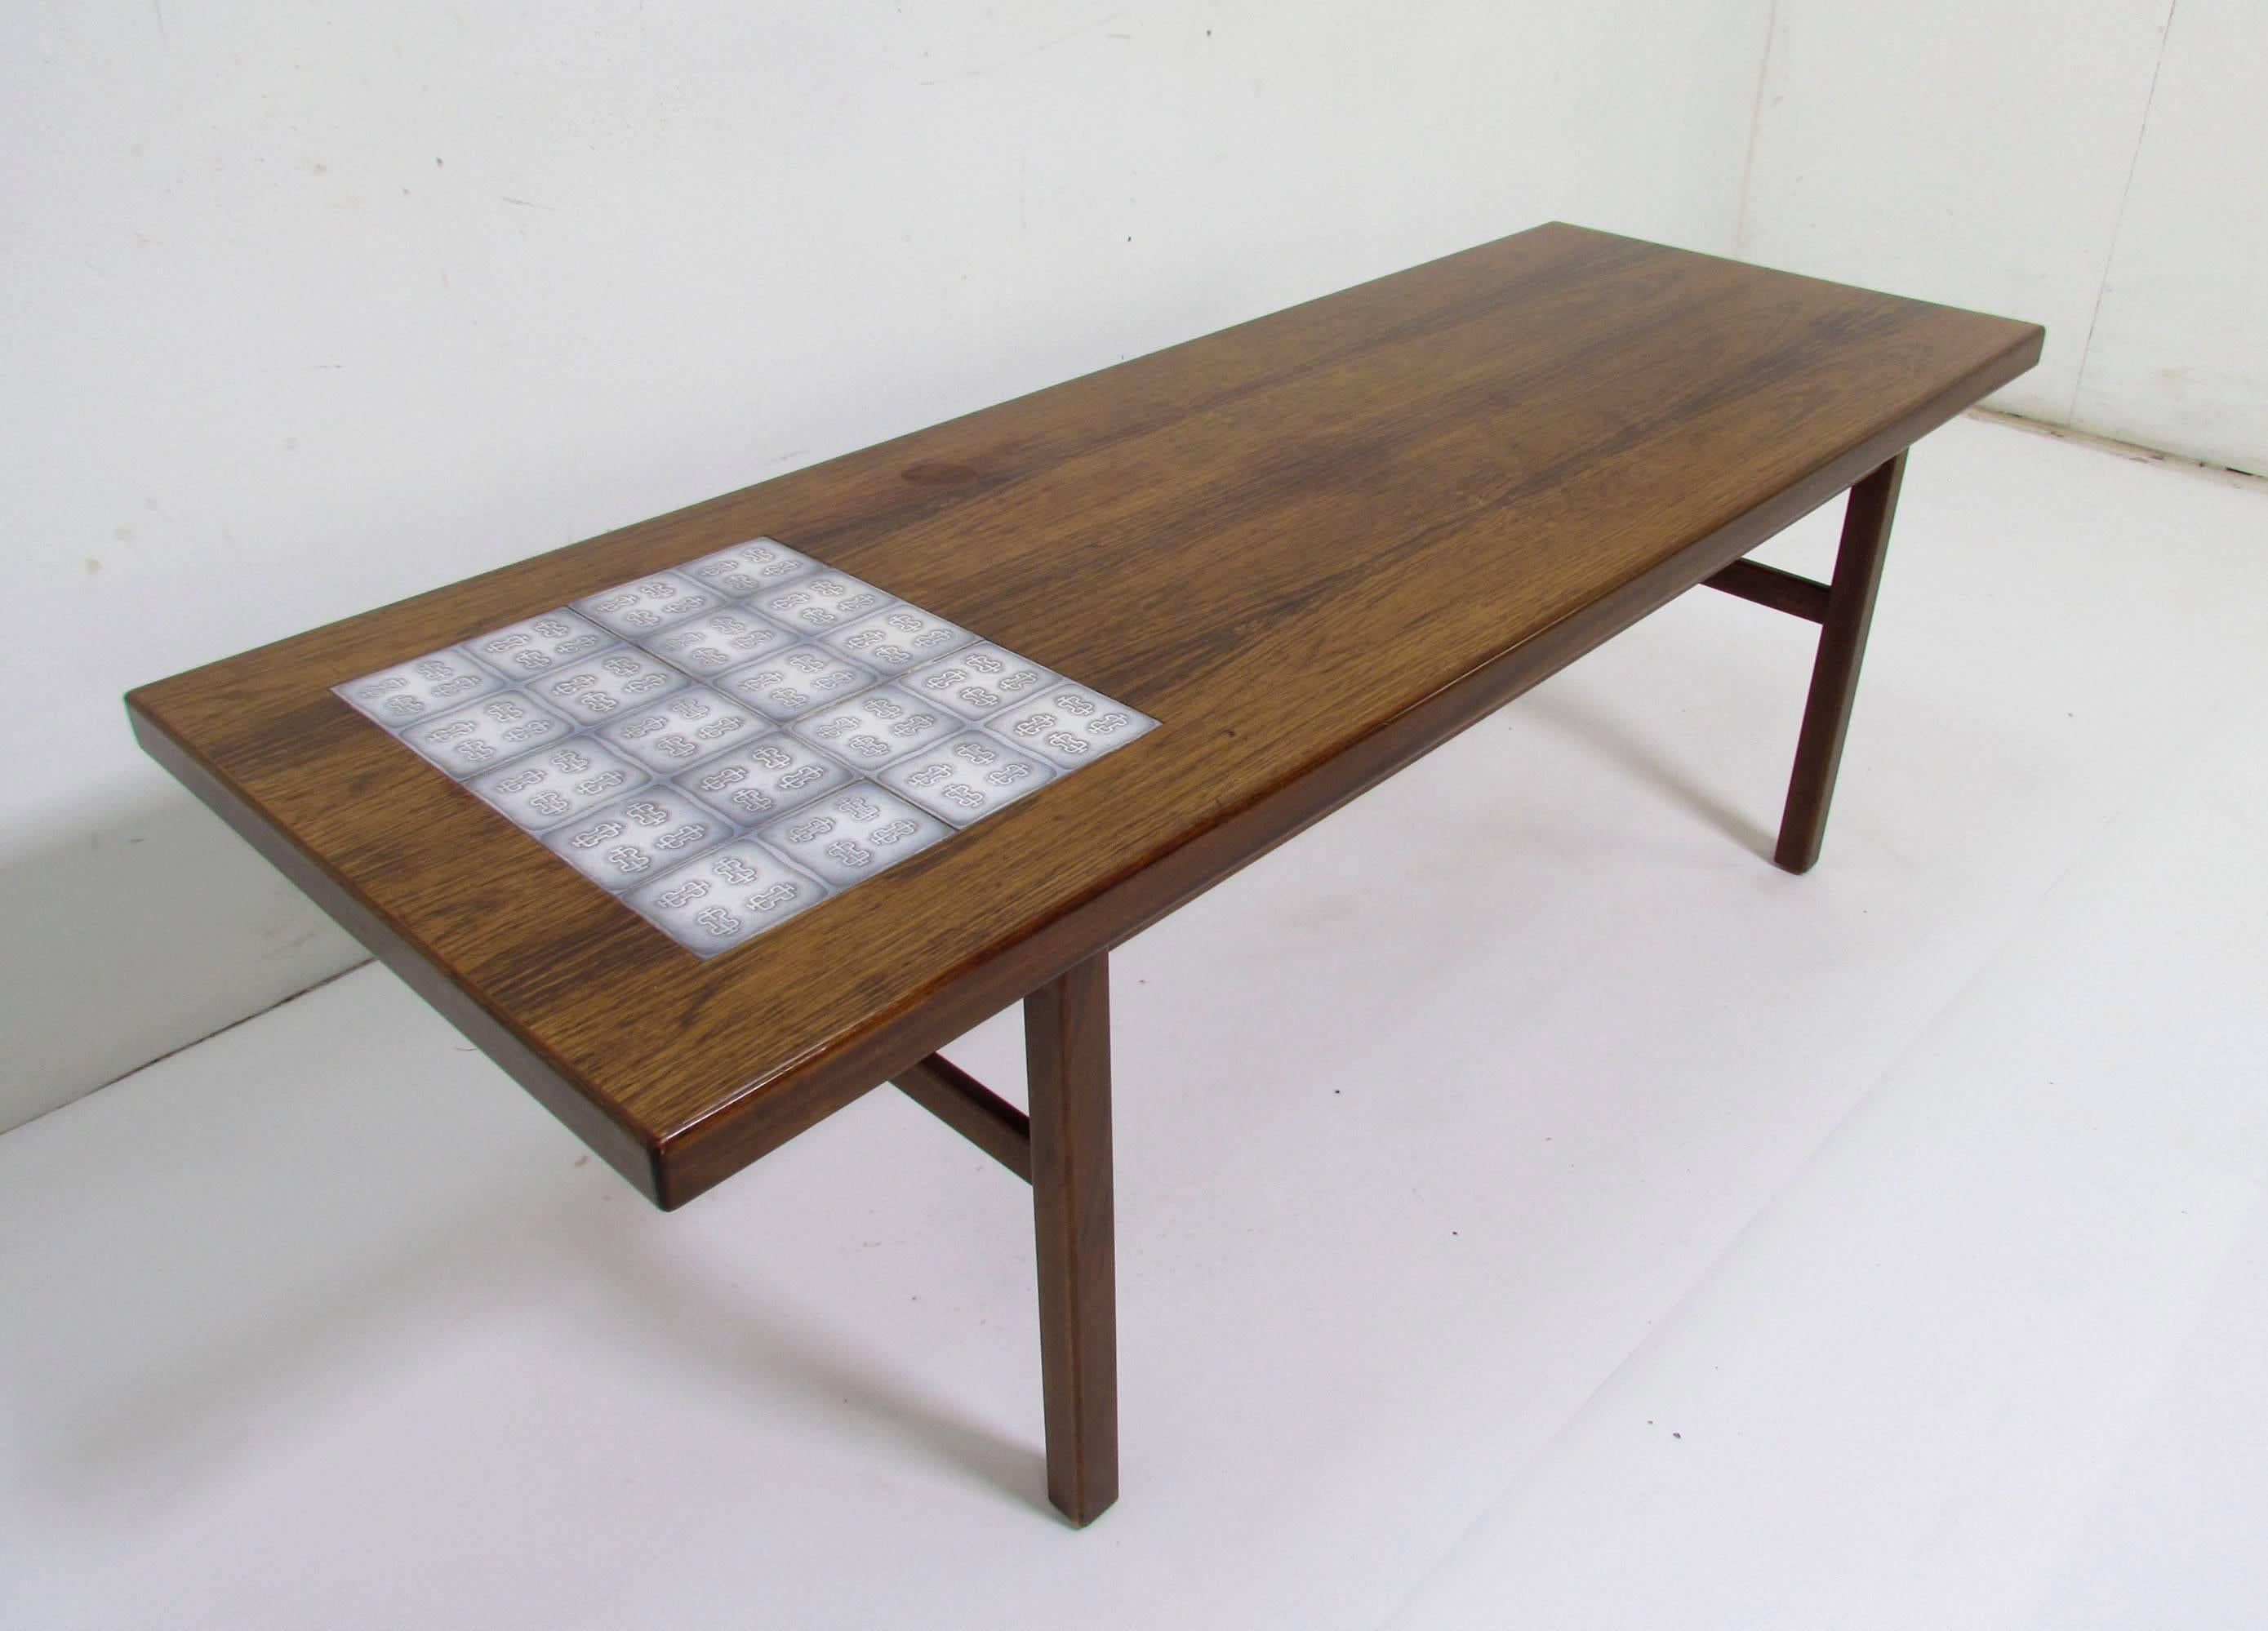 Midcentury Danish coffee table in rosewood with Royal Copenhagen tile panel accent, circa 1960s.